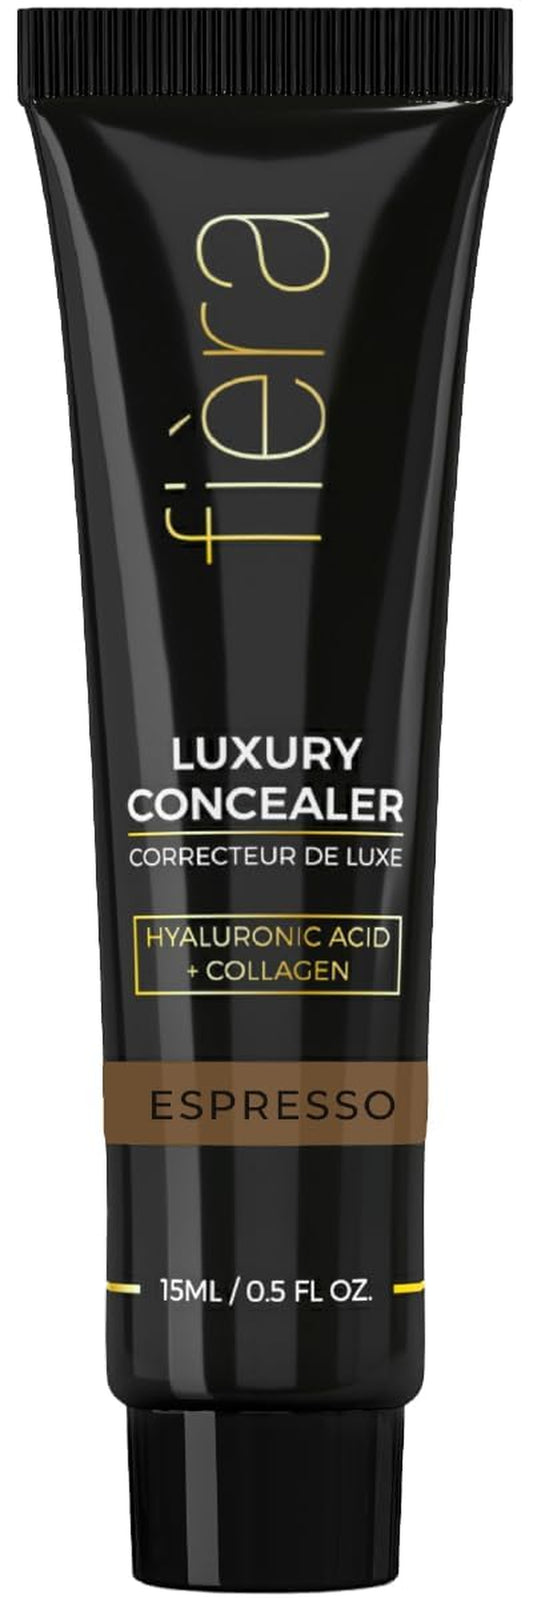 Luxury Concealer with Anti-Aging - All Day Coverage for Dark Circles, Fine Lines, Wrinkles & Spots - Espresso, 0.5 Ounce